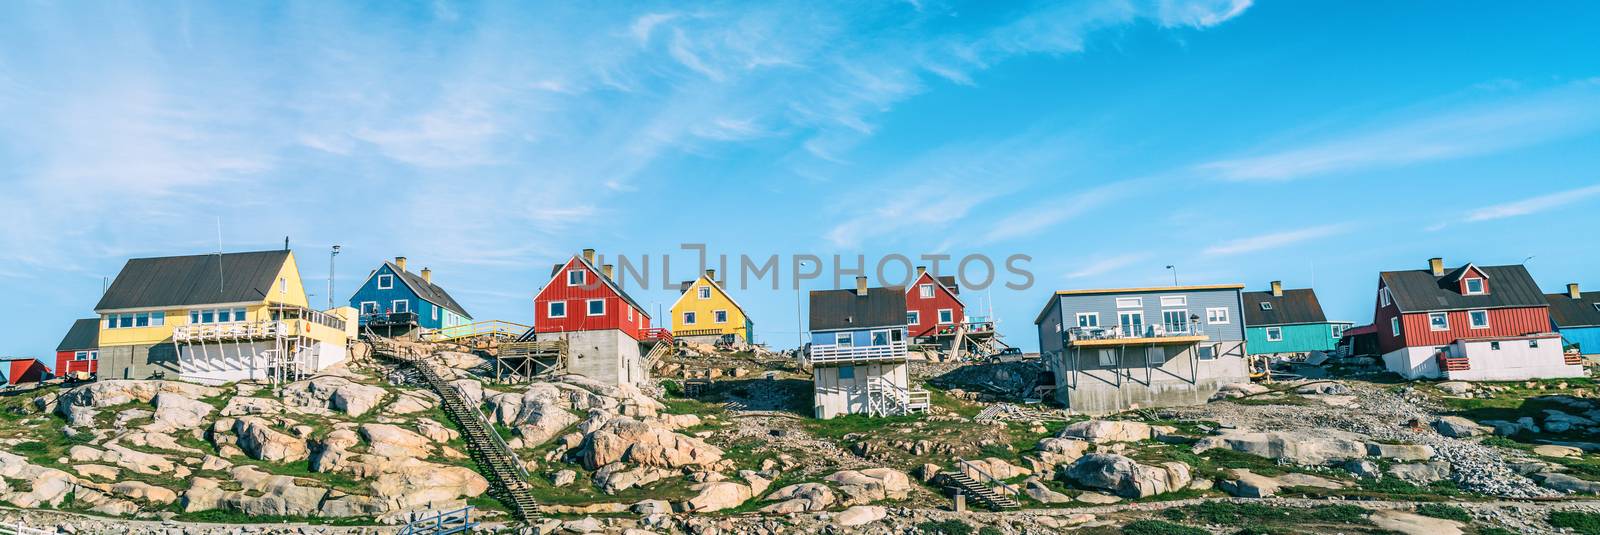 Greenland view of Ilulissat City and icefjord. Tourist destination in the actic by Maridav